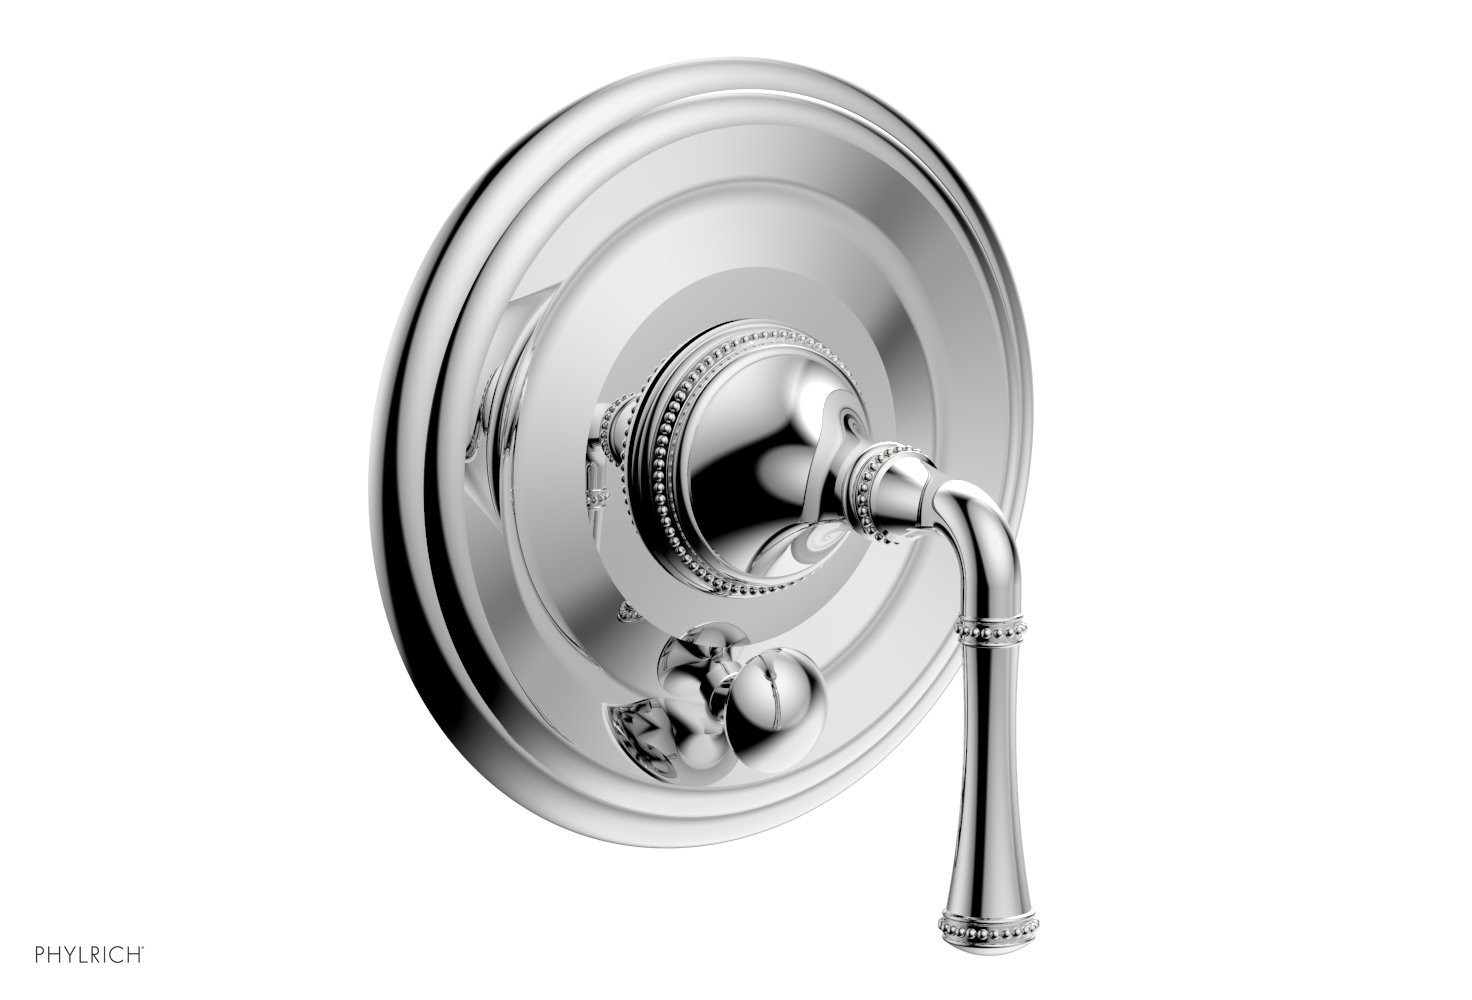 PHYLRICH 4-129 BEADED WALL MOUNT PRESSURE BALANCE SHOWER PLATE WITH DIVERTER AND LEVER HANDLE